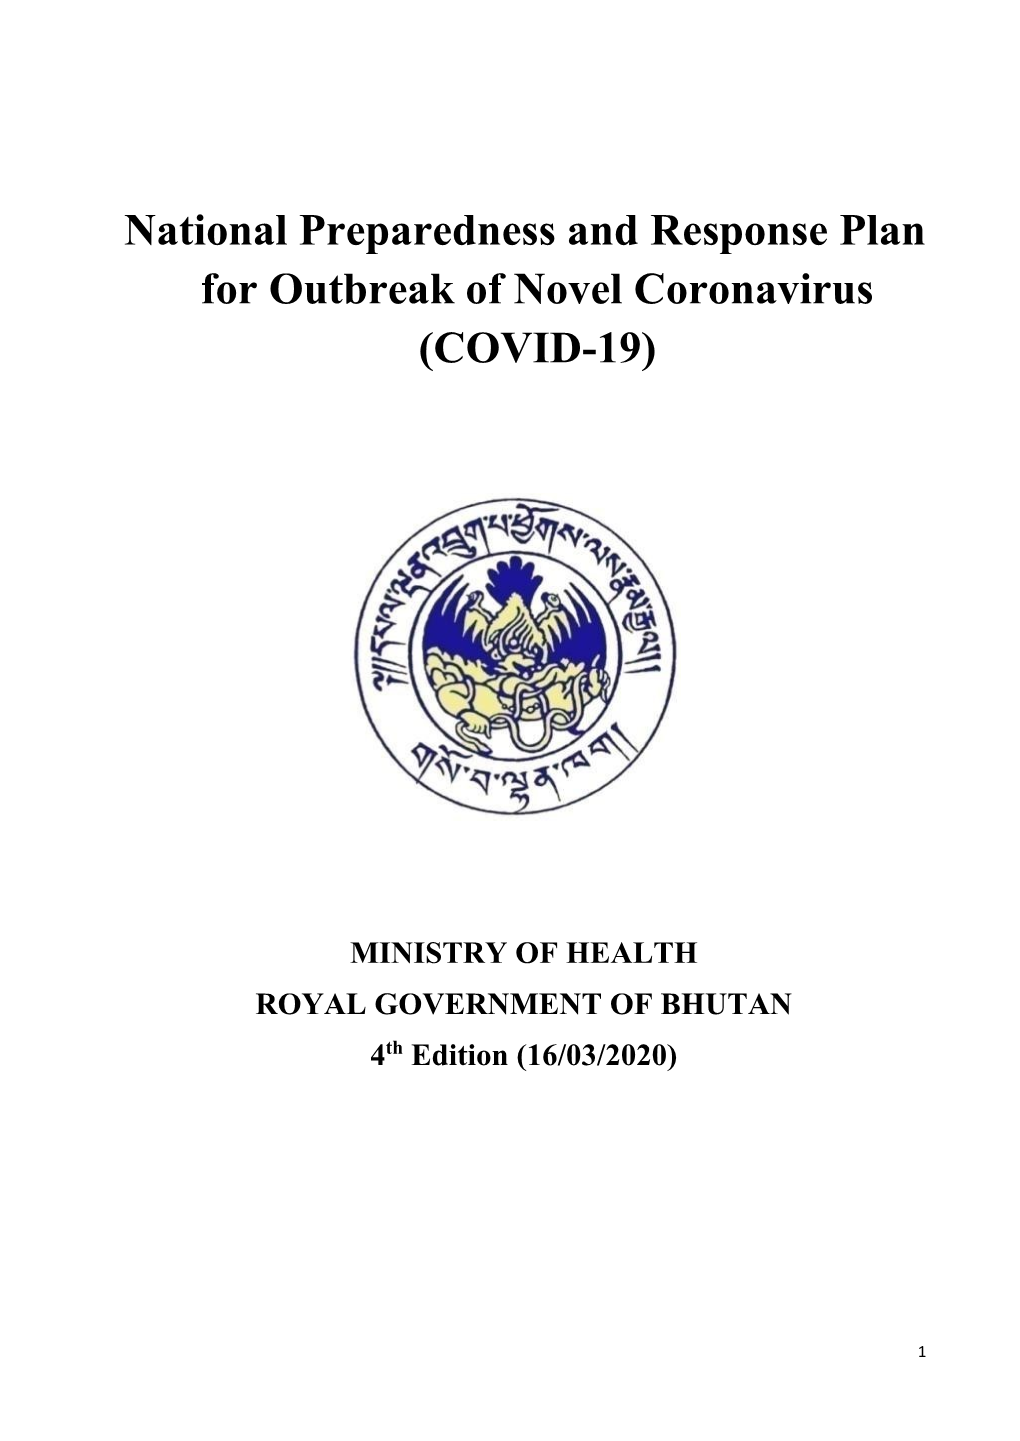 National Preparedness and Response Plan for COVID